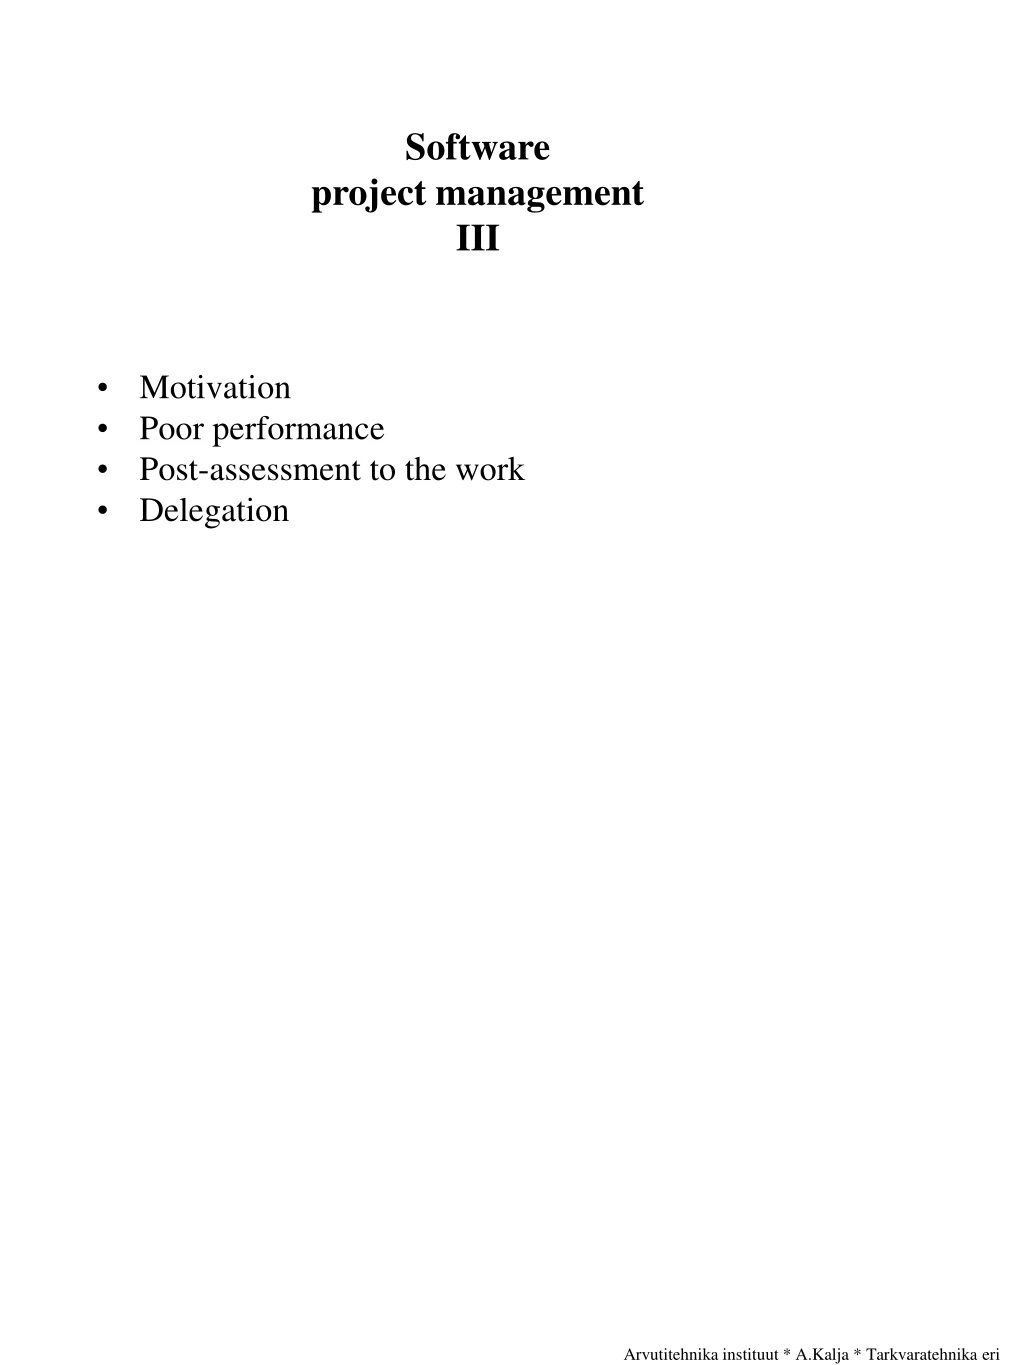 software project management iii